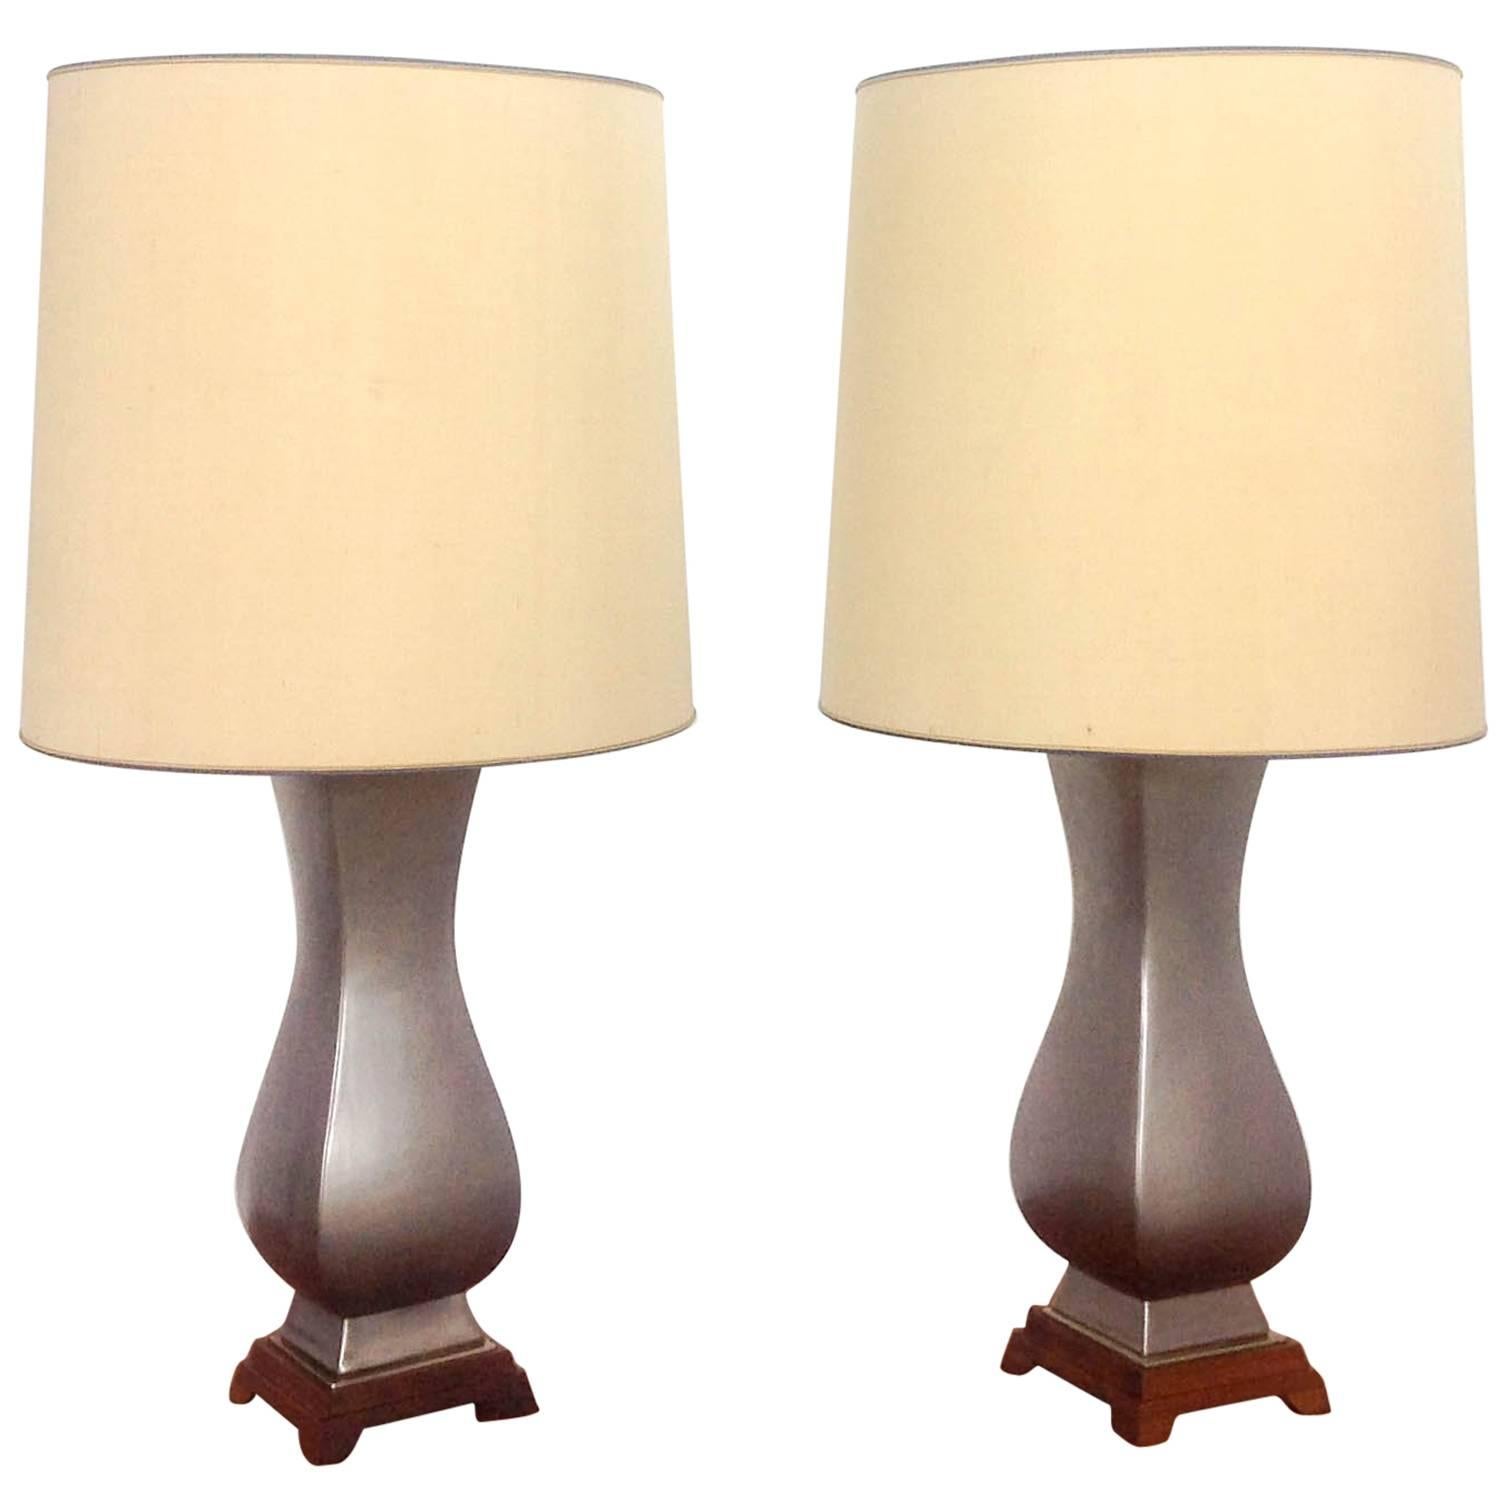 Two Gerald Thurston Table Lamps for Lightolier, 1960s